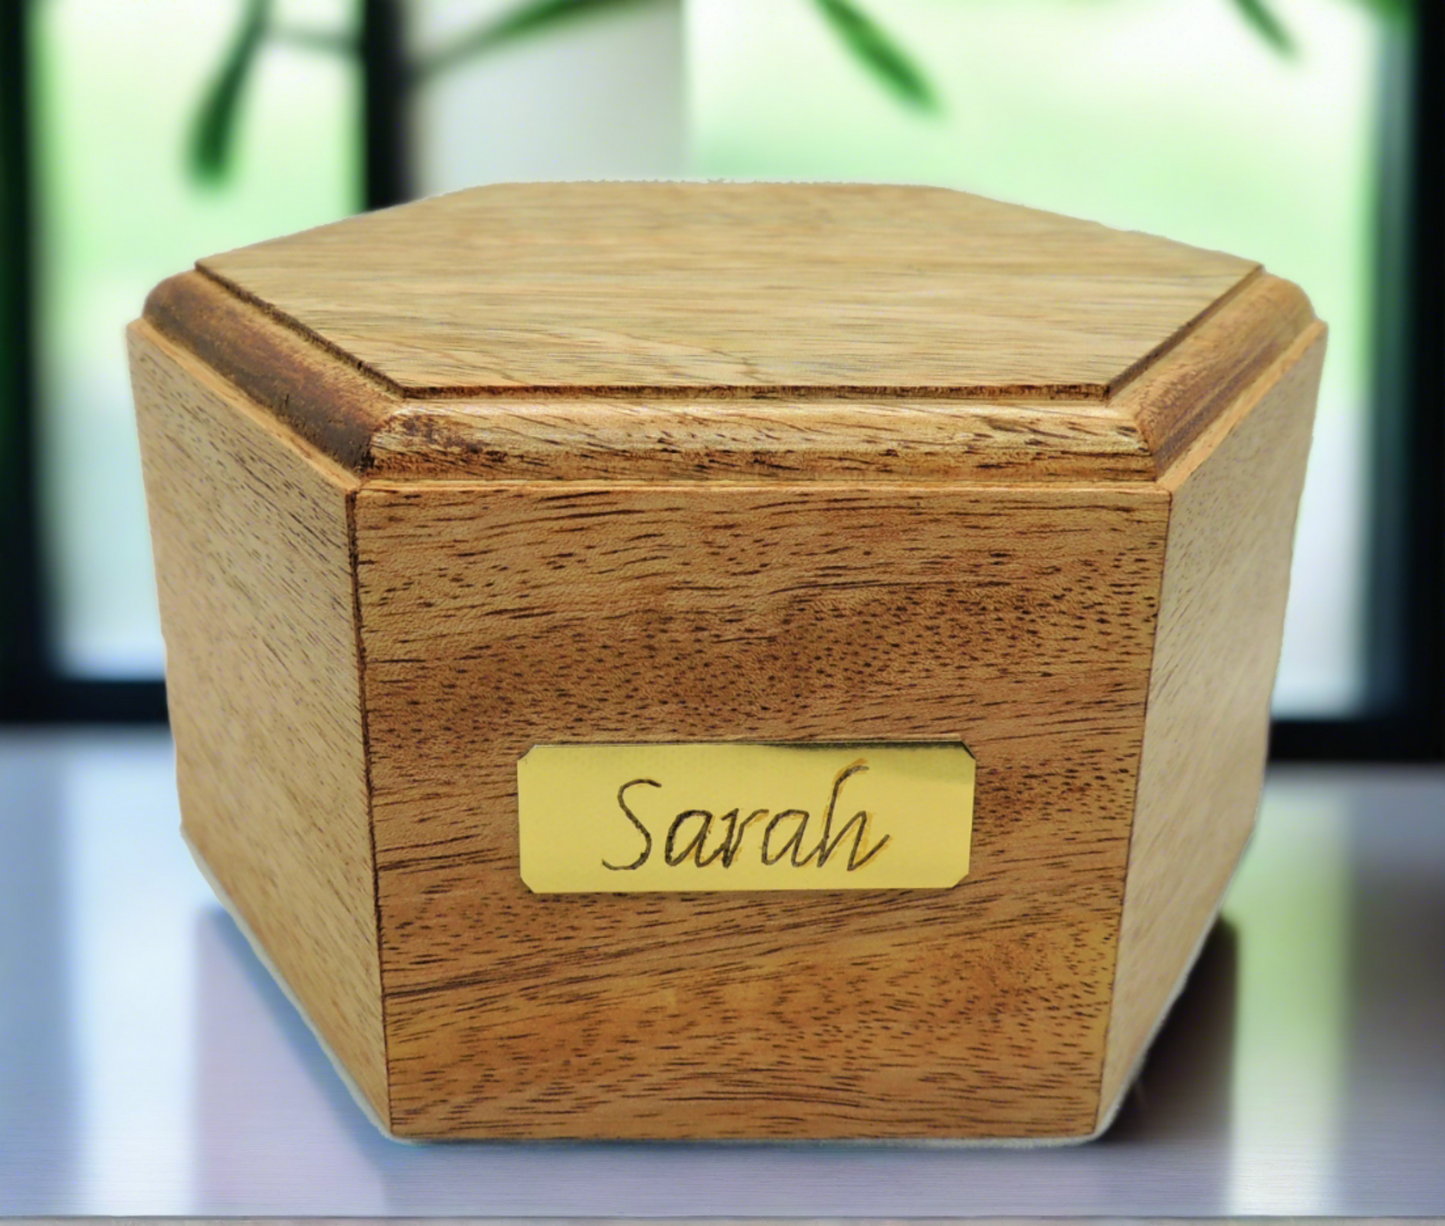 Pet Pillbox Style Cremation Urn With Engraved Name Plate (Light finish)